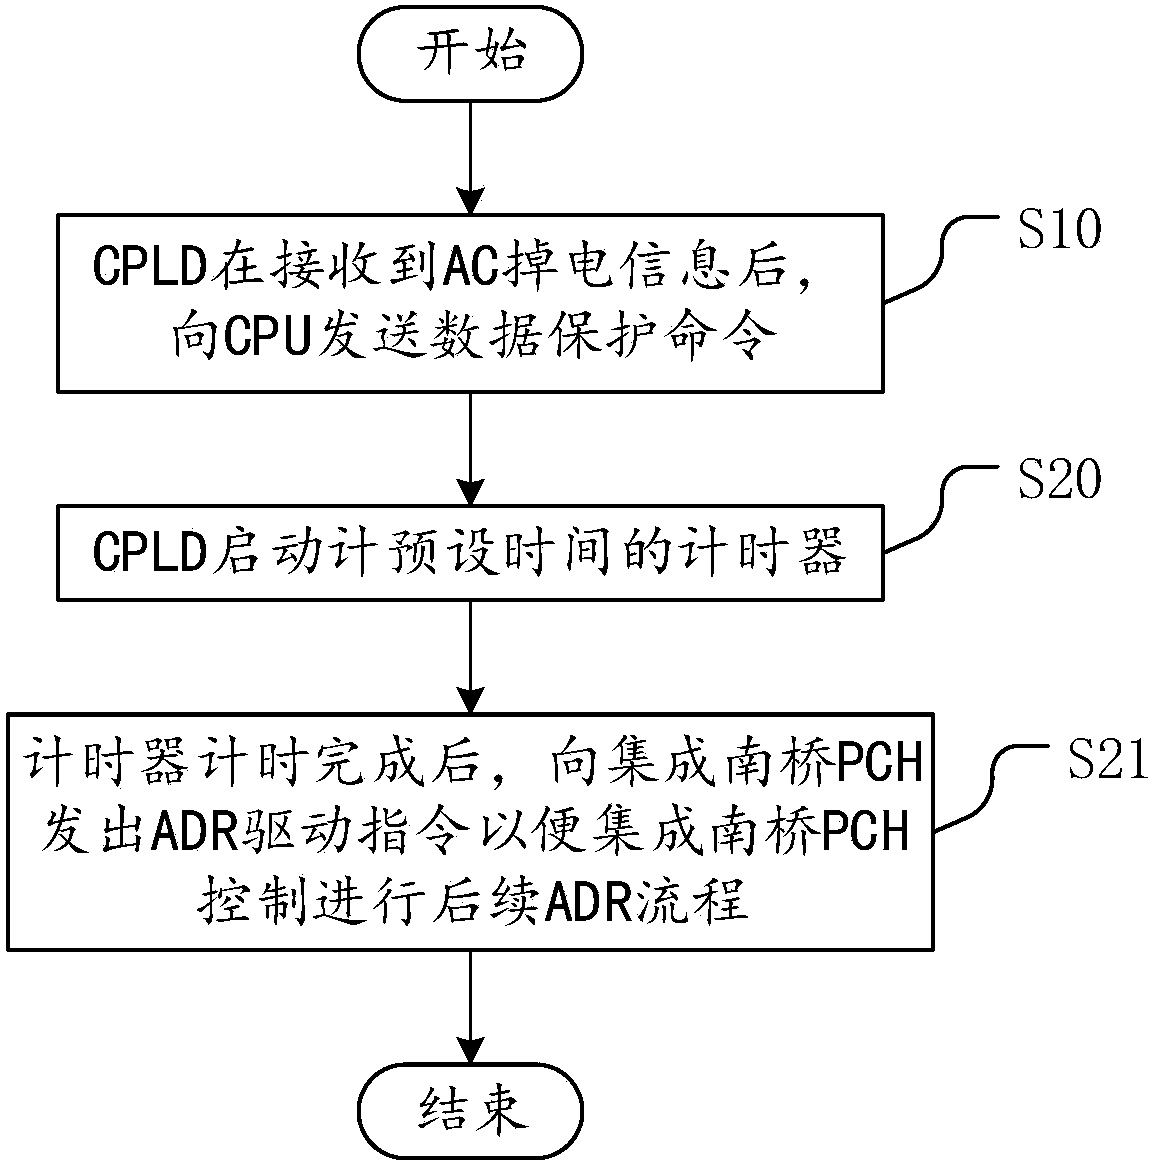 Method and system for protecting CPU Cache data after AC power failure